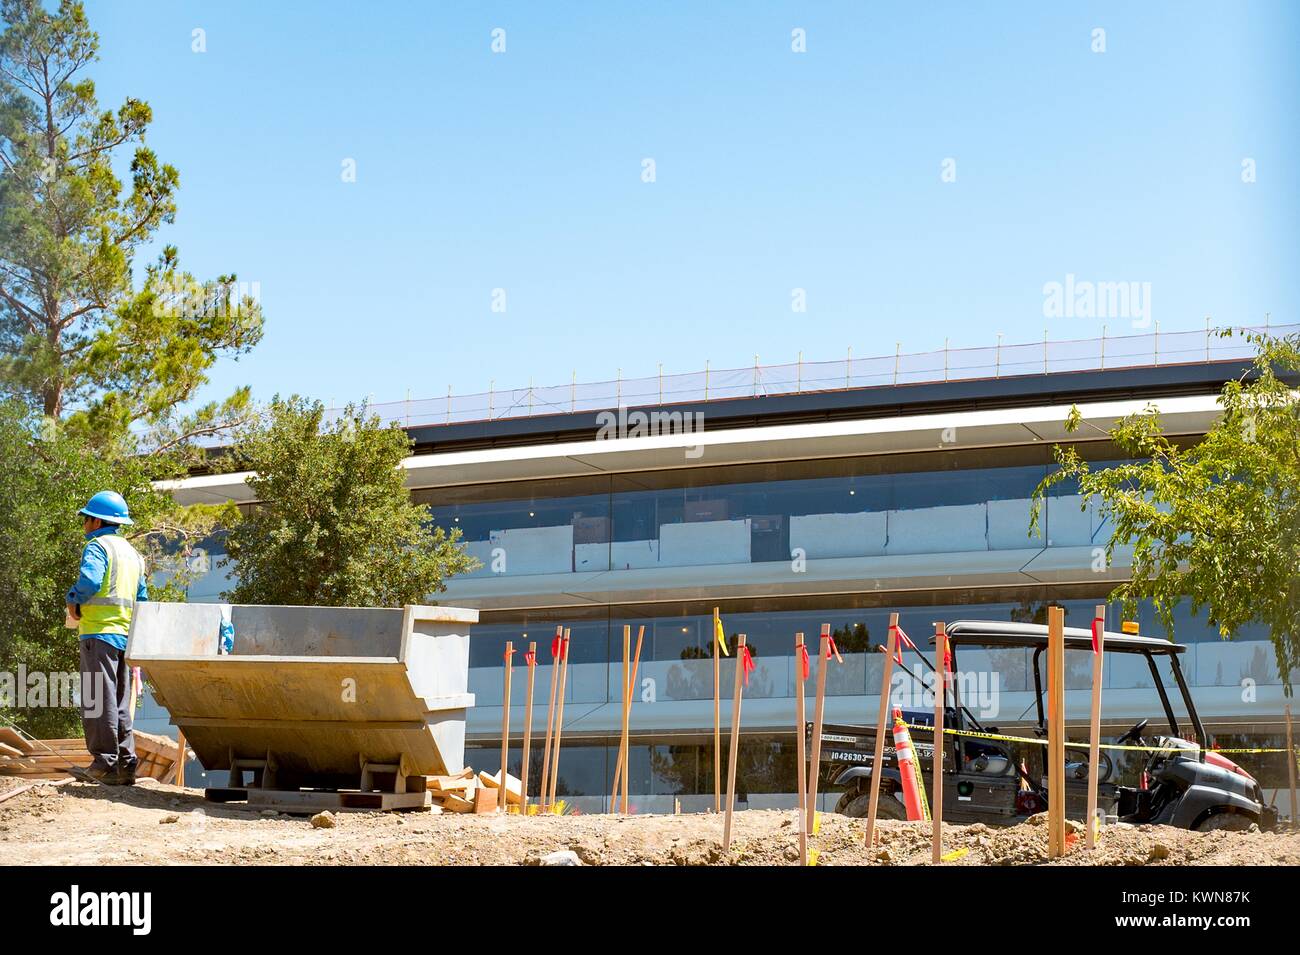 A construction worker in a high visibility vest and blue hard hat stands with construction equipment in front of a portion of the Apple Park, known colloquially as 'The Spaceship', the new headquarters of Apple Inc in the Silicon Valley town of Cupertino, California, July 25, 2017. Stock Photo